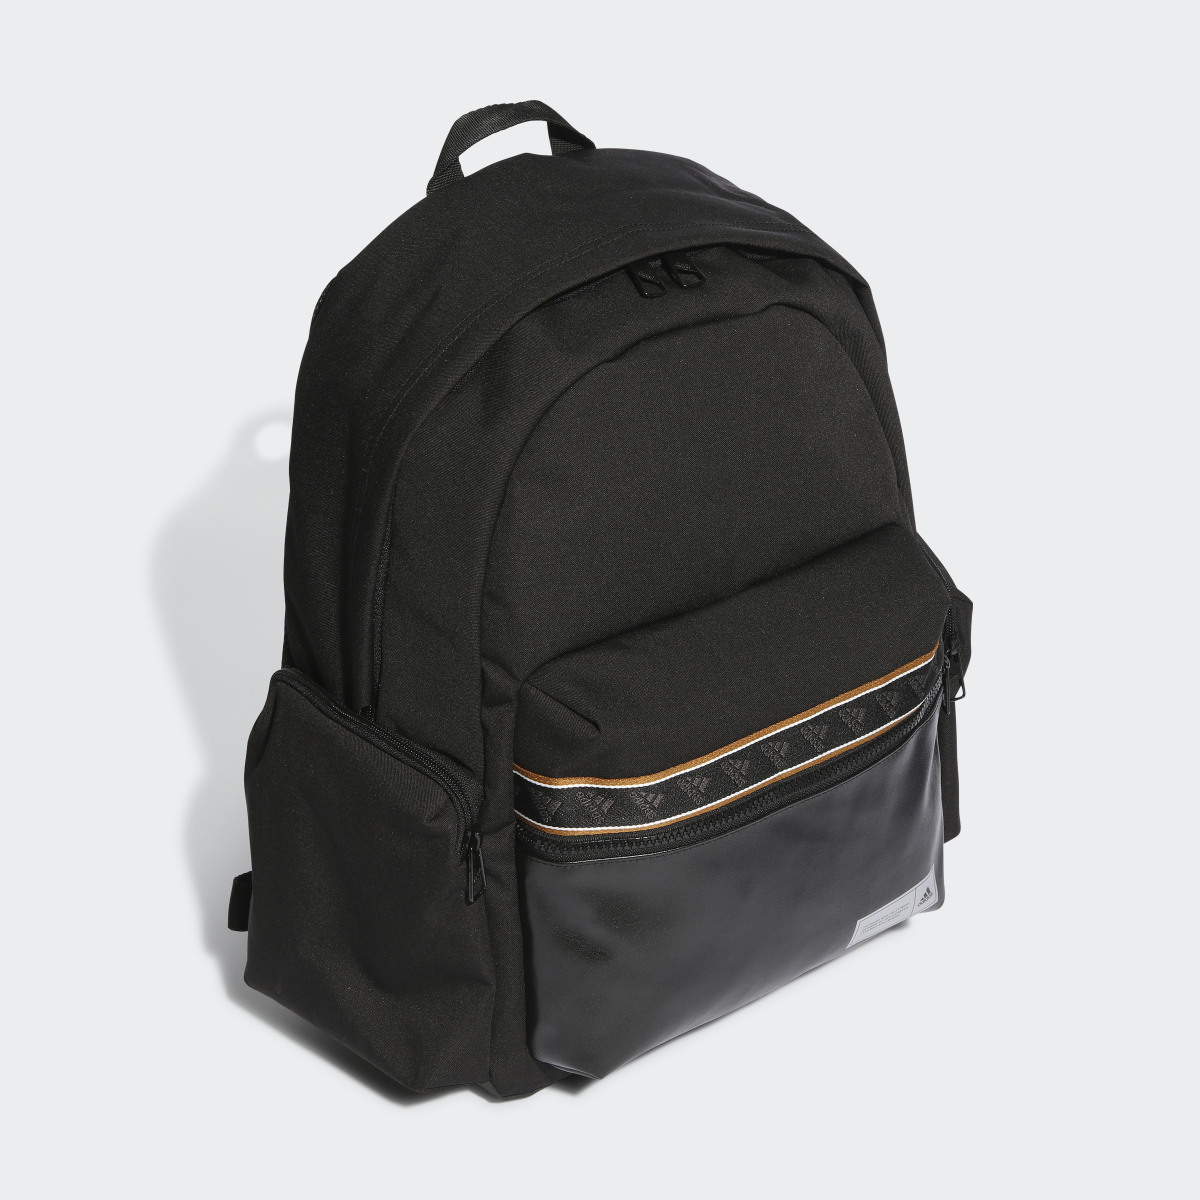 Adidas Back to School Classic Backpack. 4